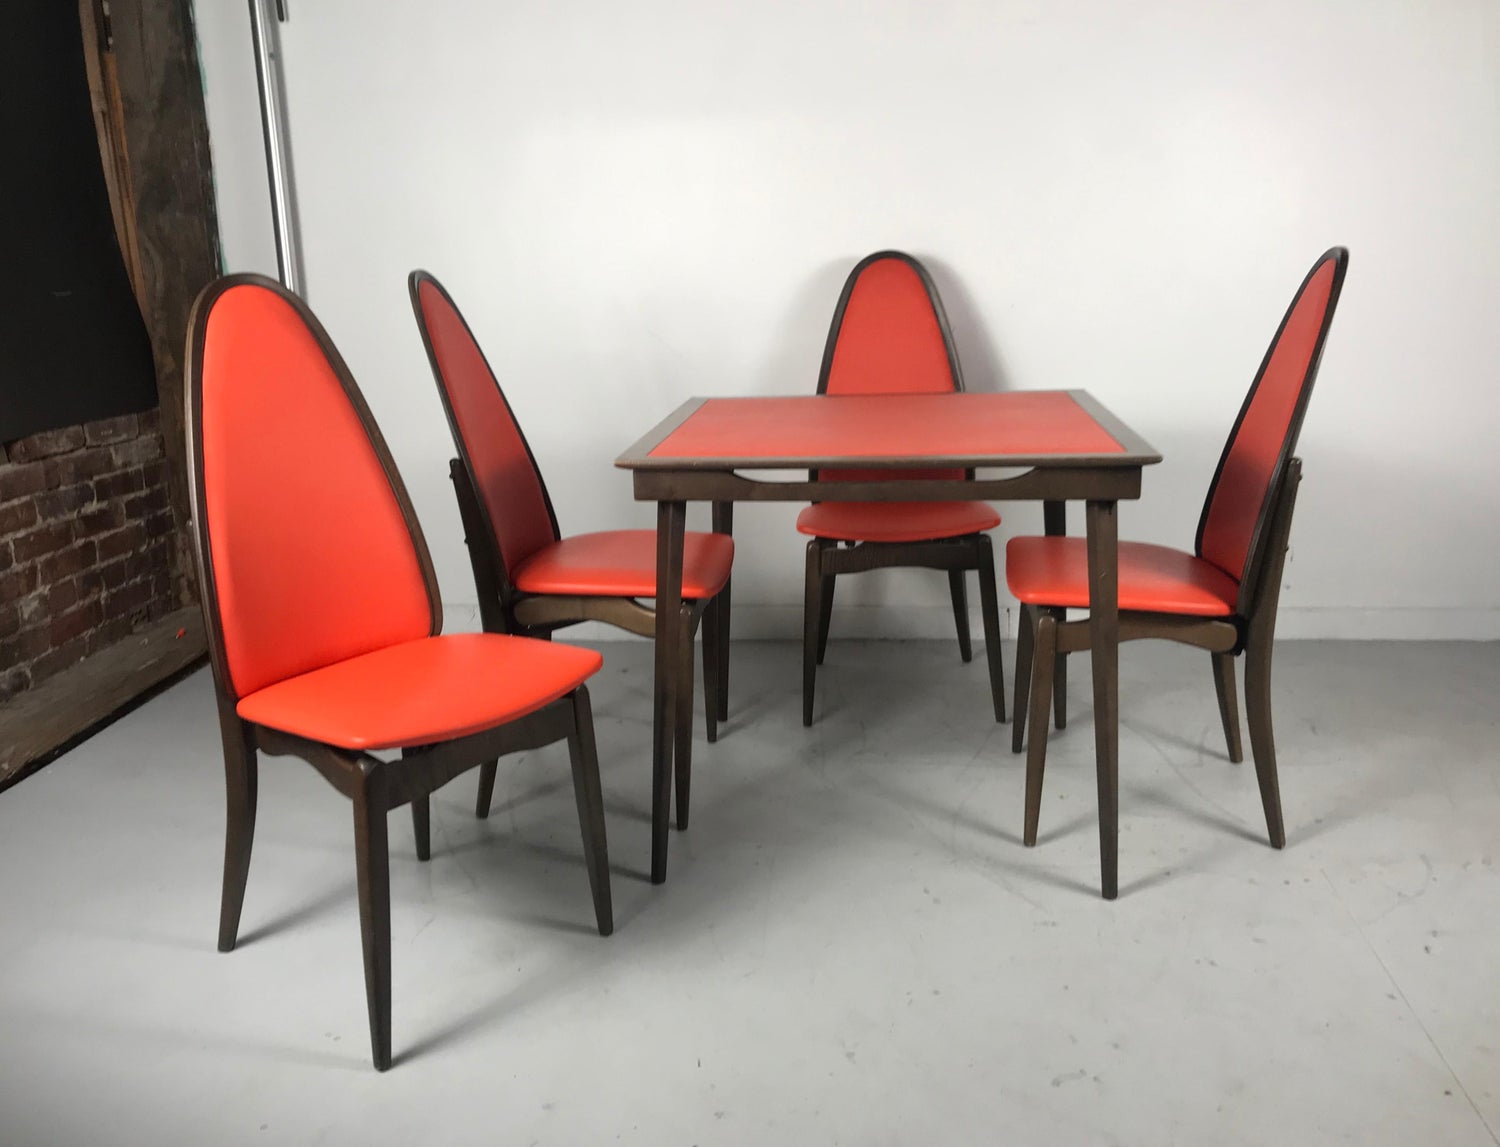 Elegant Stylized Folding Table And Chairs Mfg By Stakmore